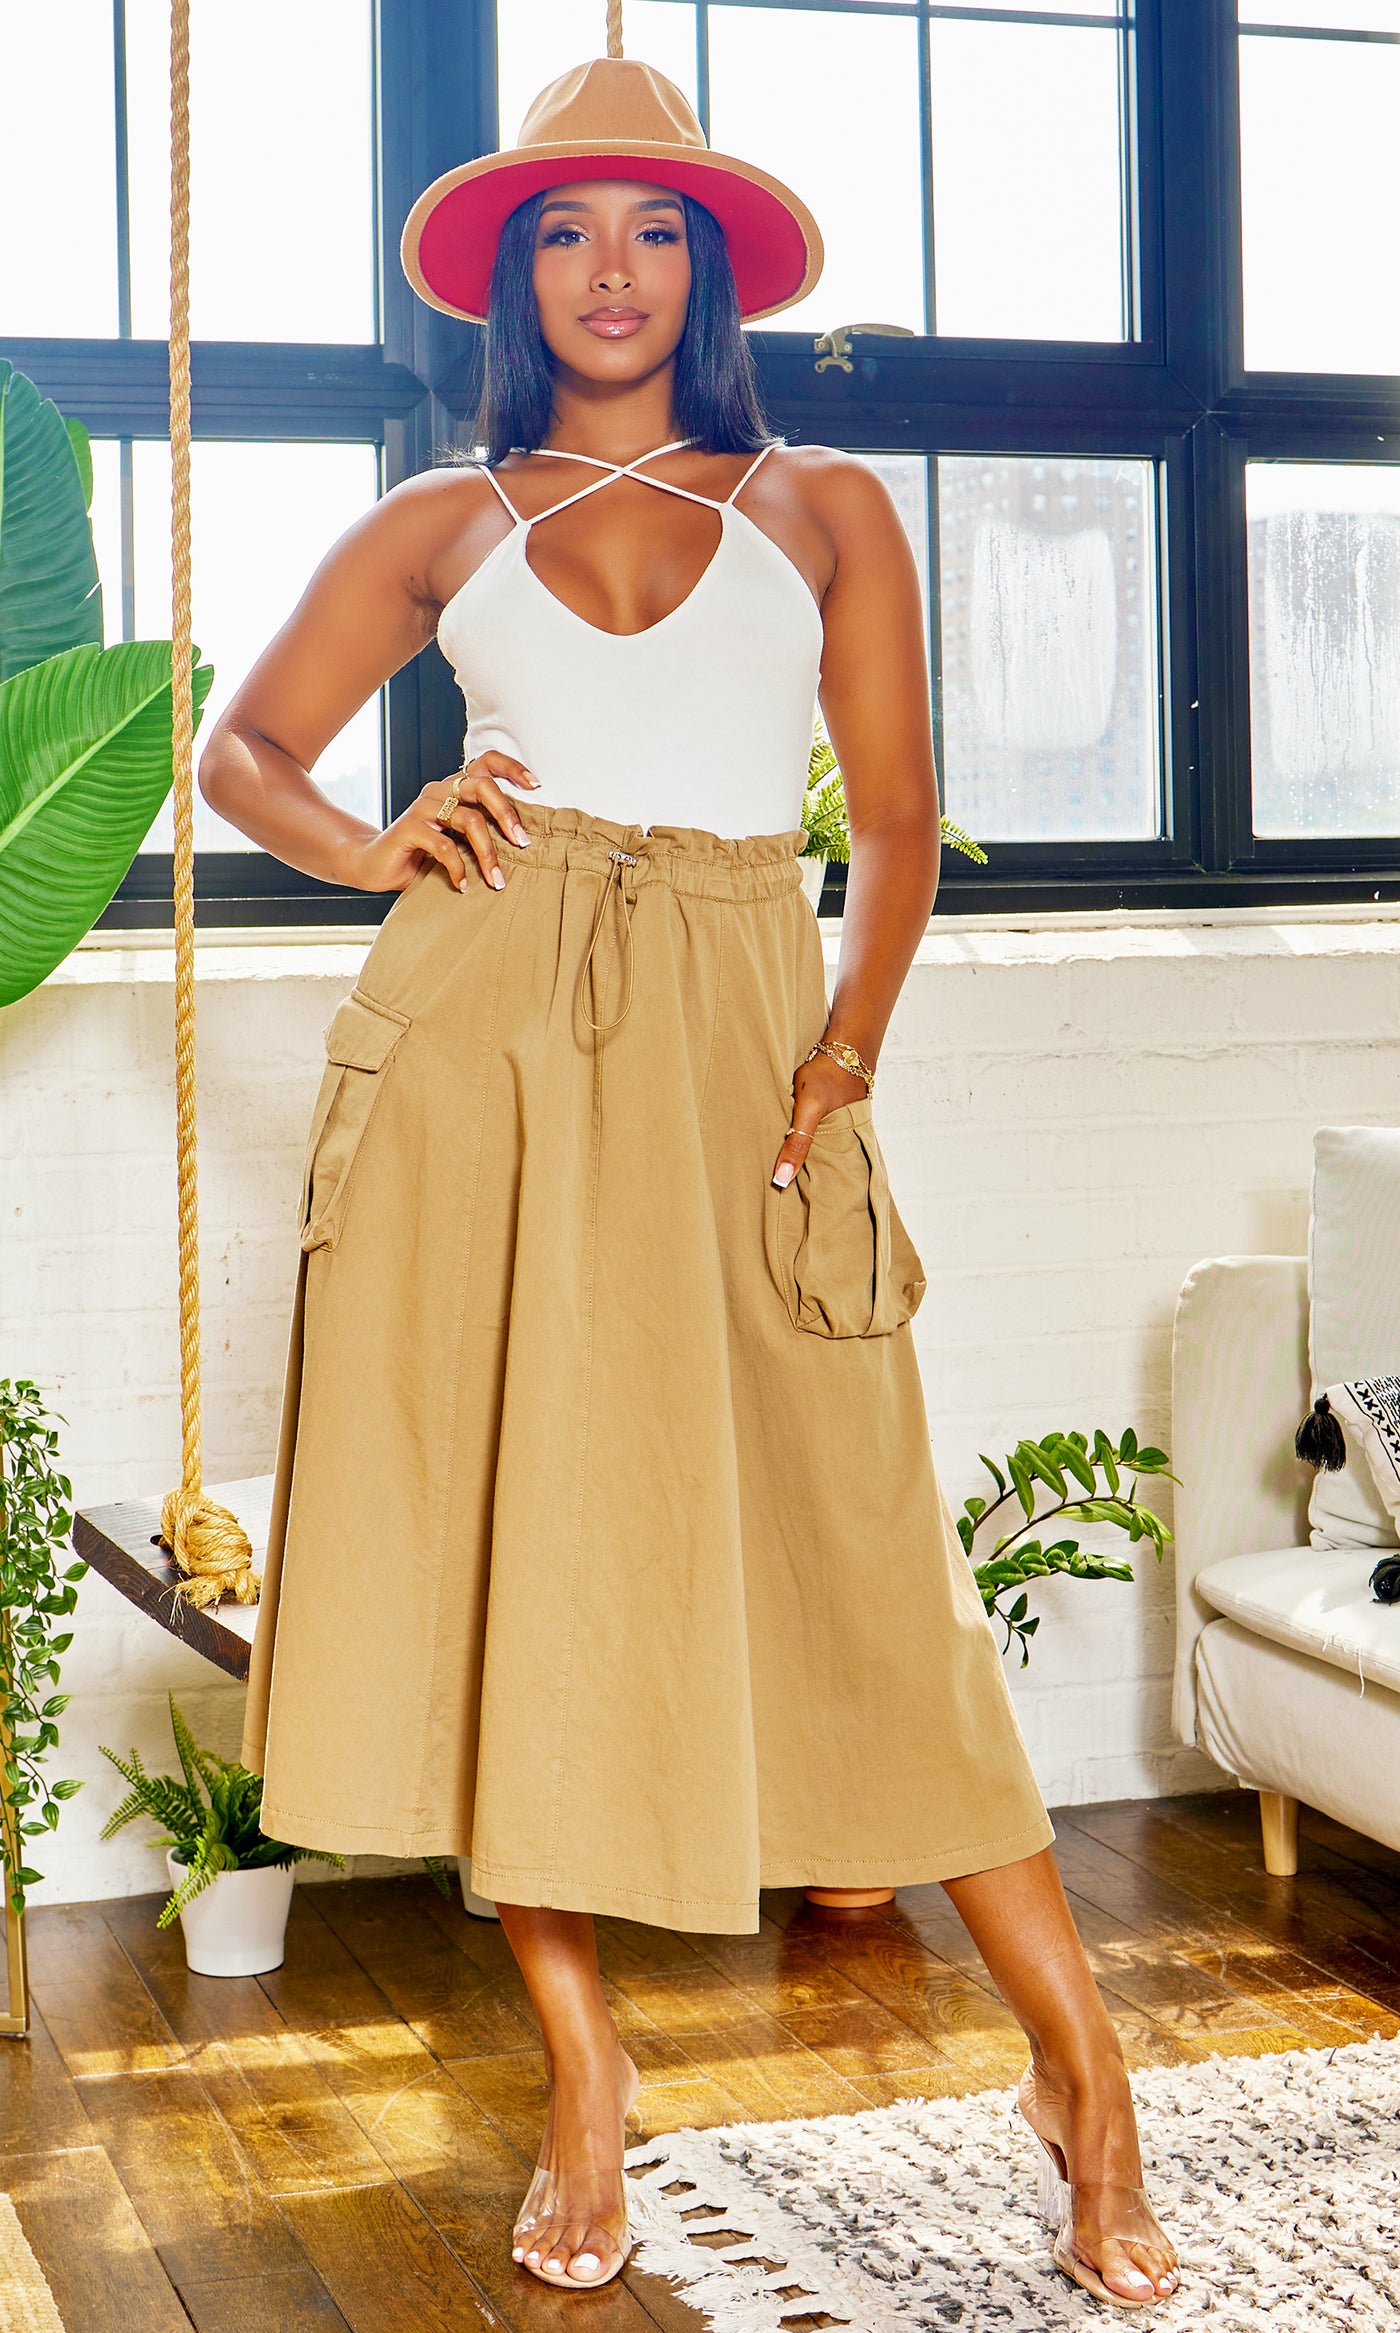 Enigma - Simply Classy Skirt's Allure Khaki - Cutely Covered